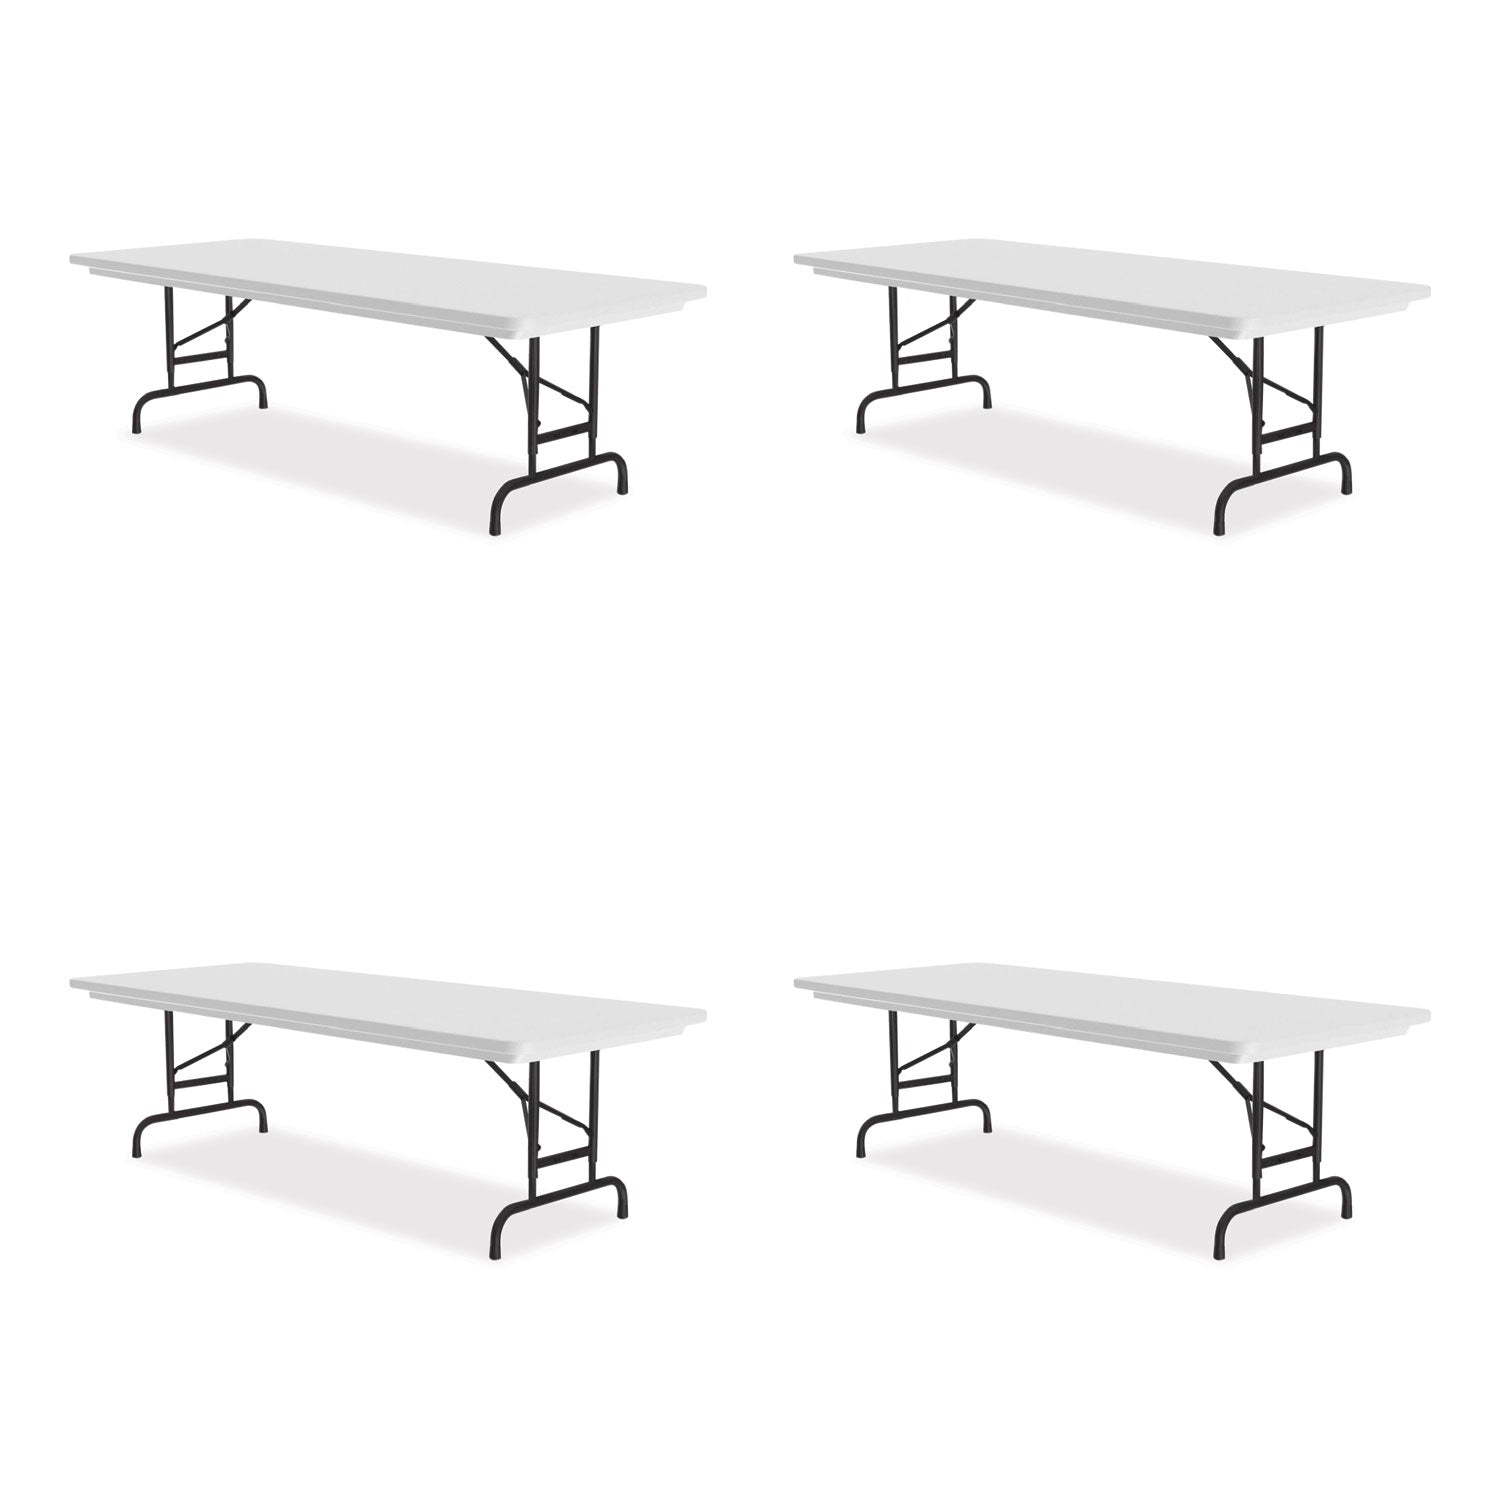 adjustable-folding-tables-rectangular-72-x-30-x-22-to-32-gray-top-black-legs-4-pallet-ships-in-4-6-business-days_crlra3072234p - 1